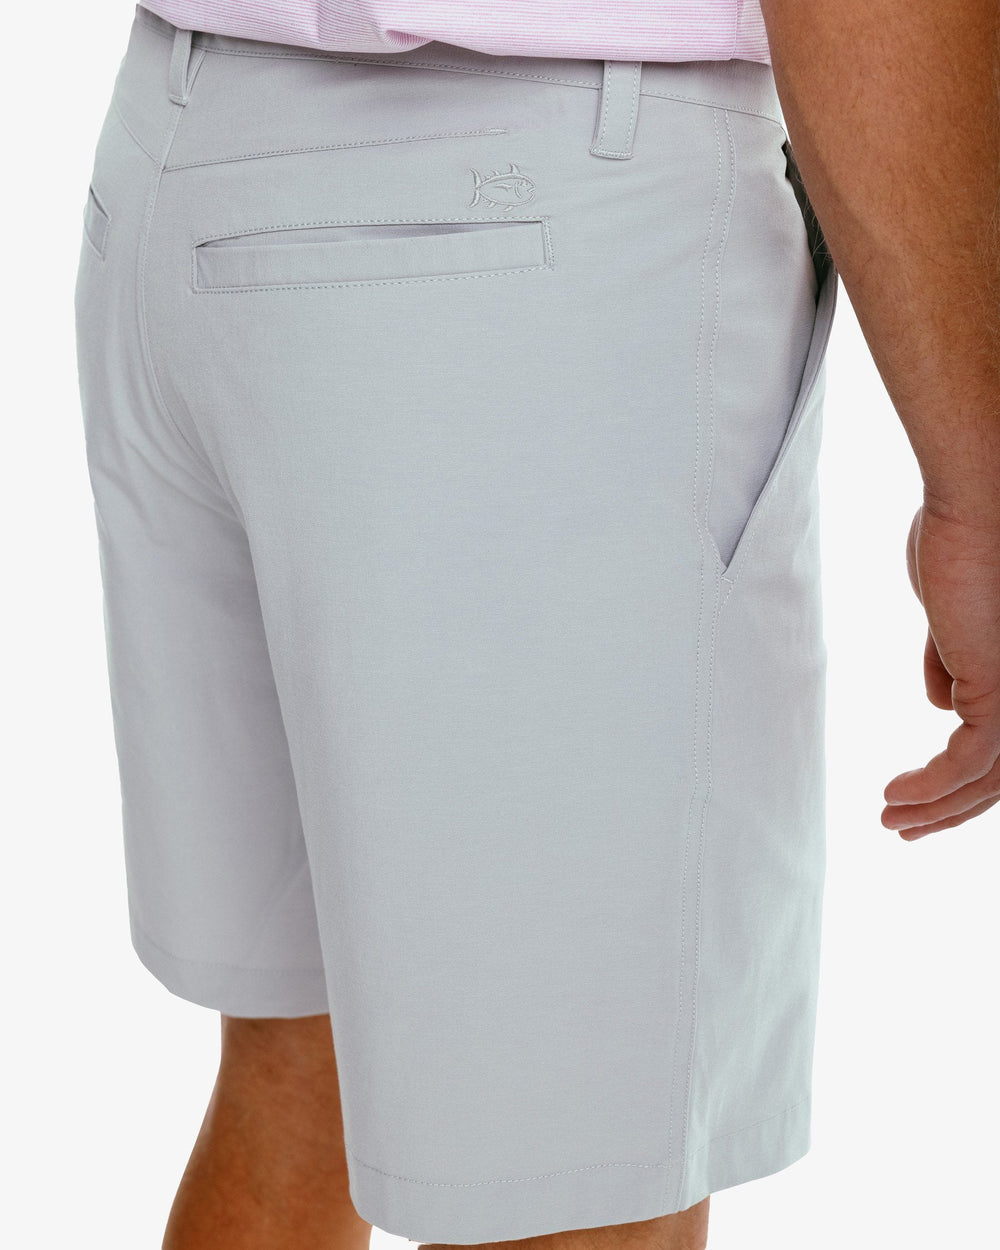 The detail of the Men's T3 Gulf 9 Inch Performance Short by Southern Tide - Seagull Grey